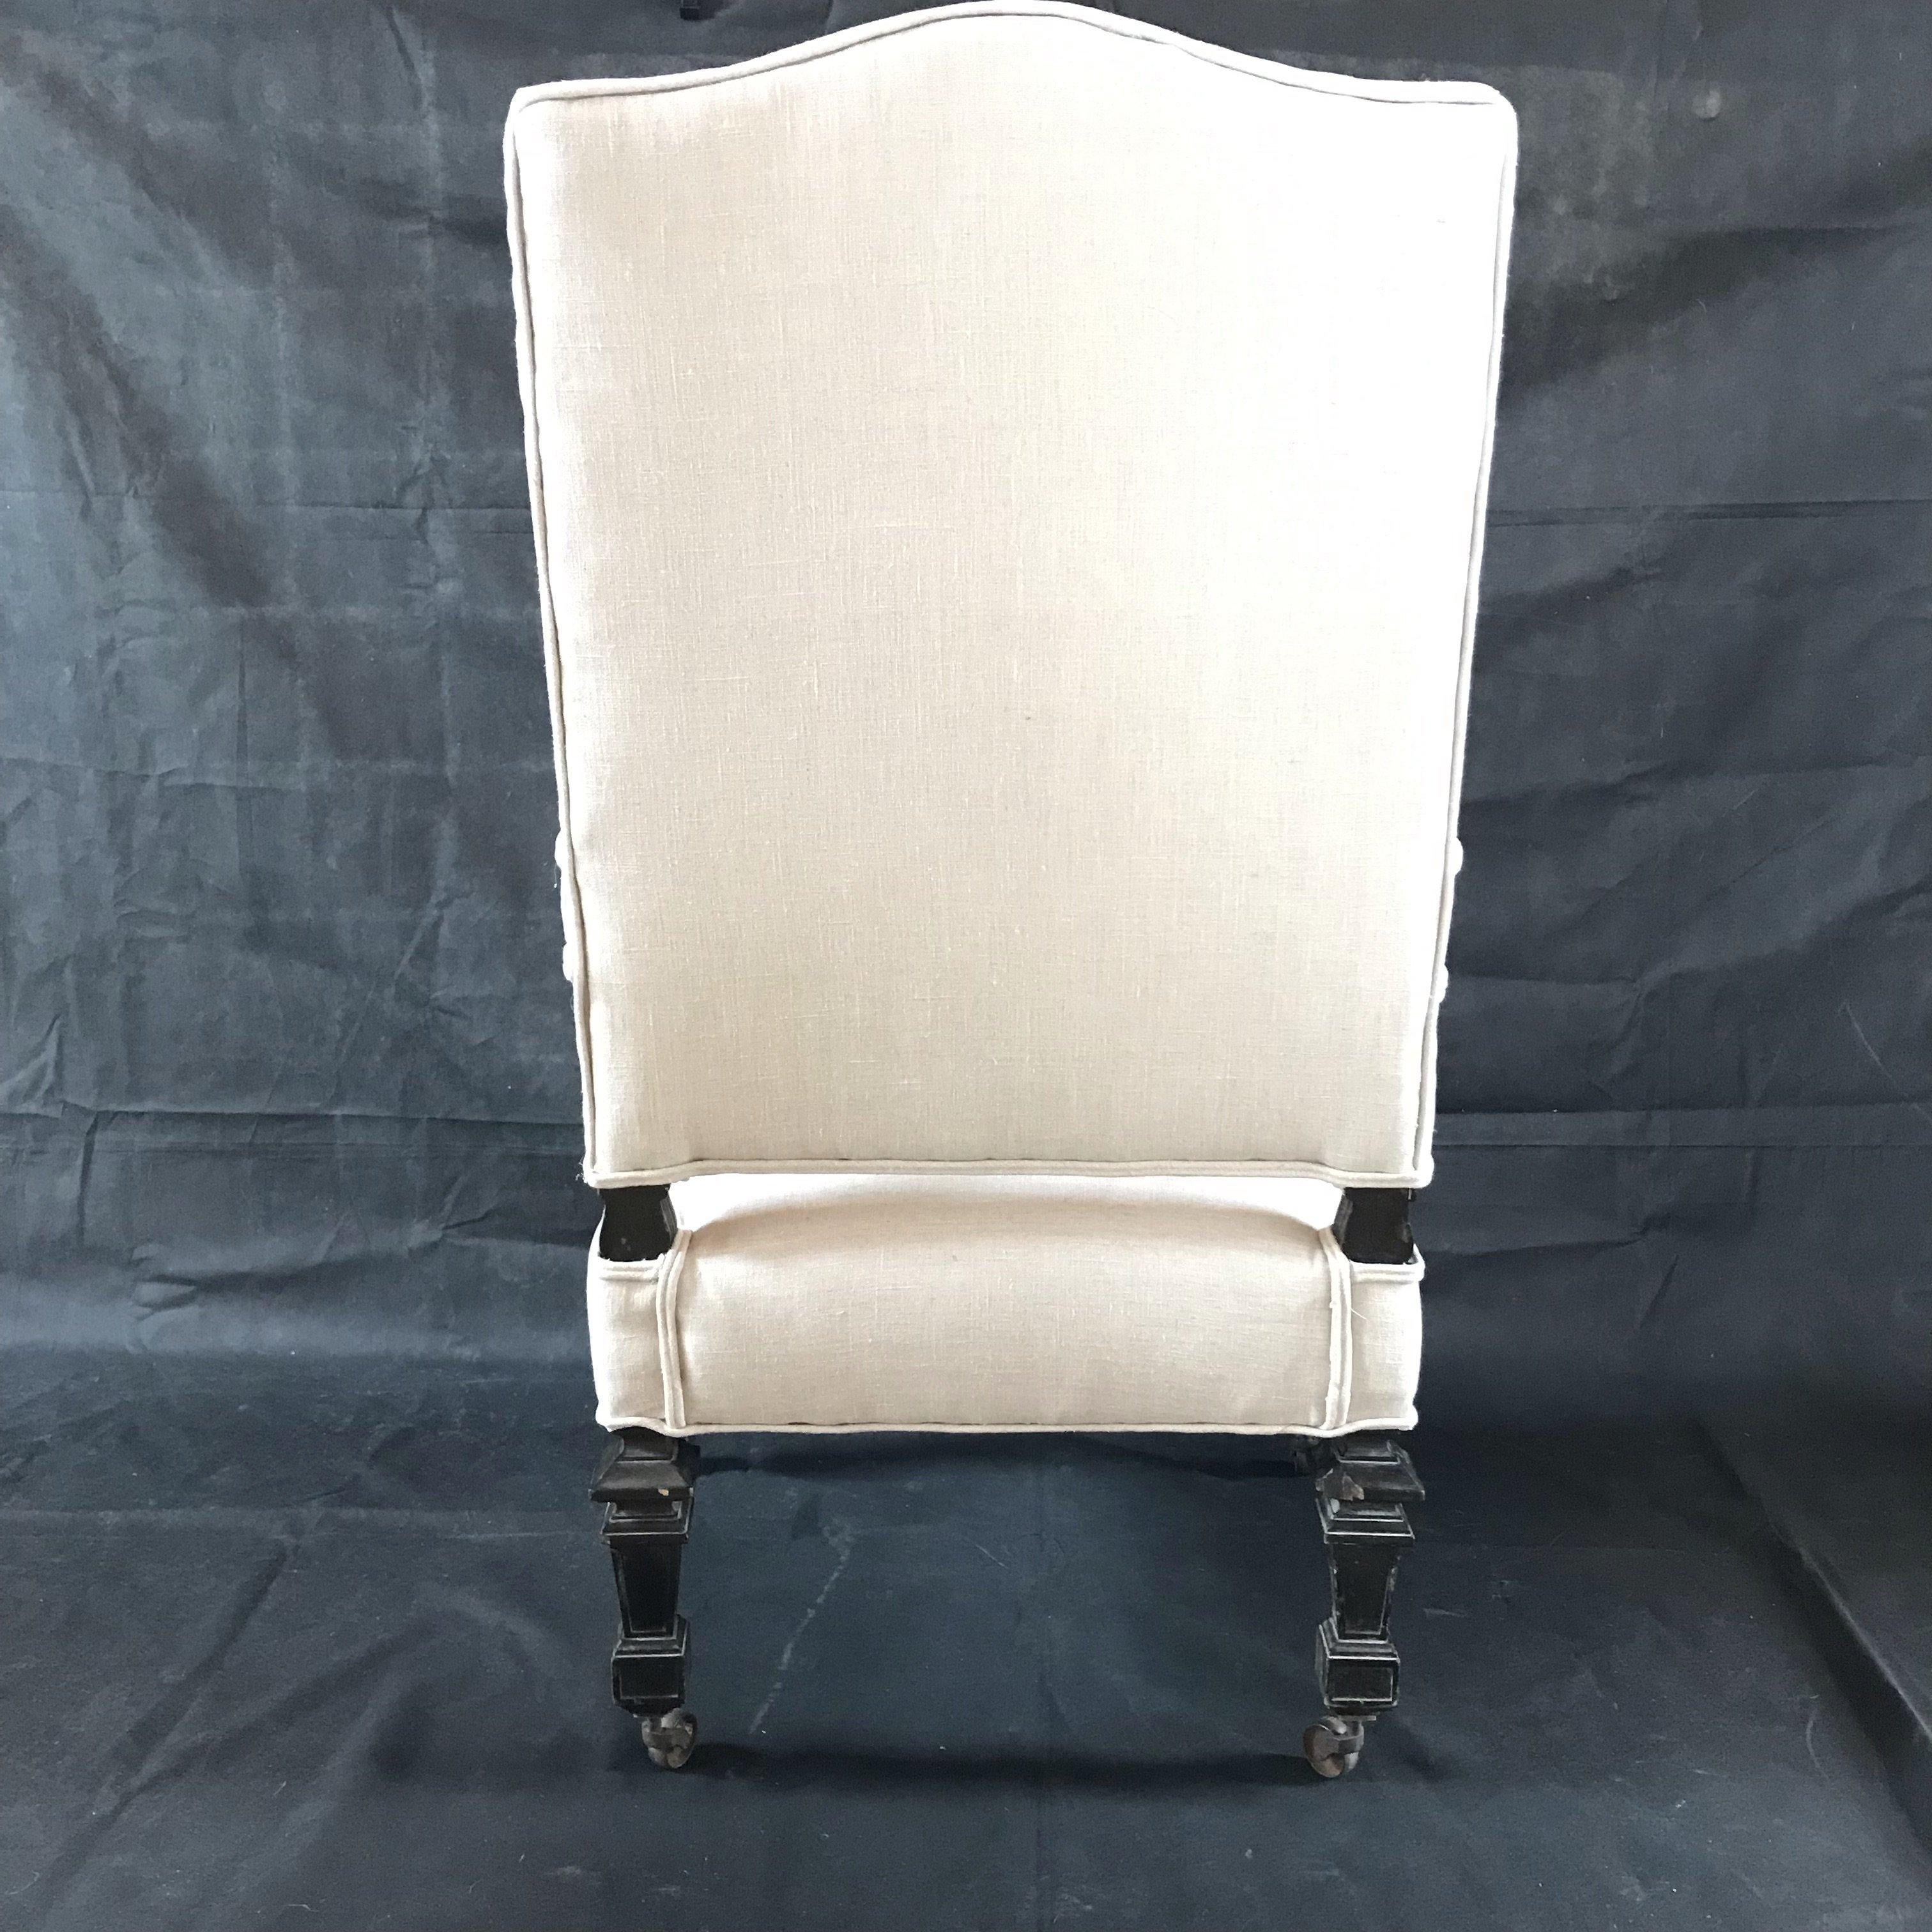 A sophisticated French Louis XIV antique armchair having beautiful hand carved arm rests of scrolling acanthus leaves. New crisp linen upholstery and original casters on feet. Pillow is additional $150.
#2047.

 